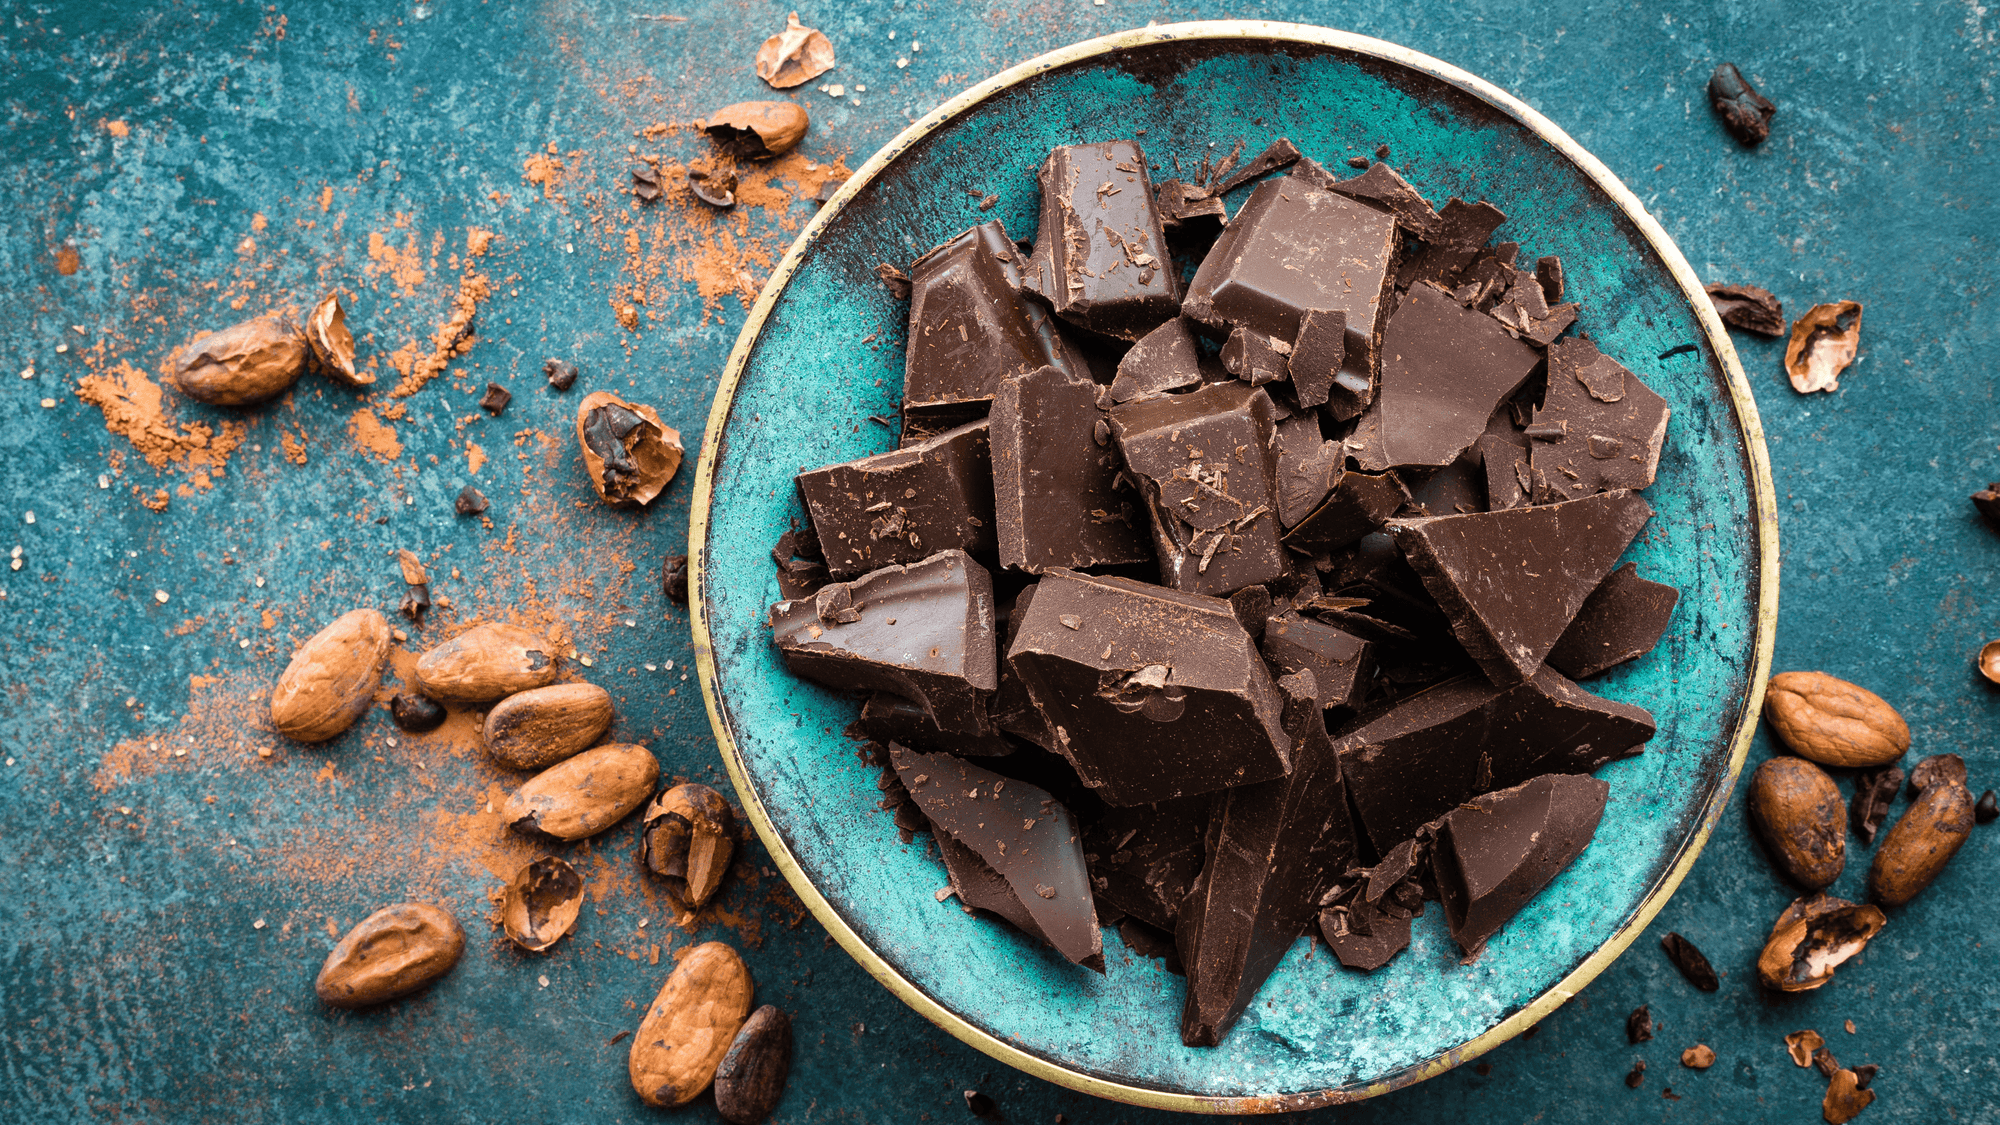 Chocolate: Top 5 Healthiest (and Ethical) Brands on the Market